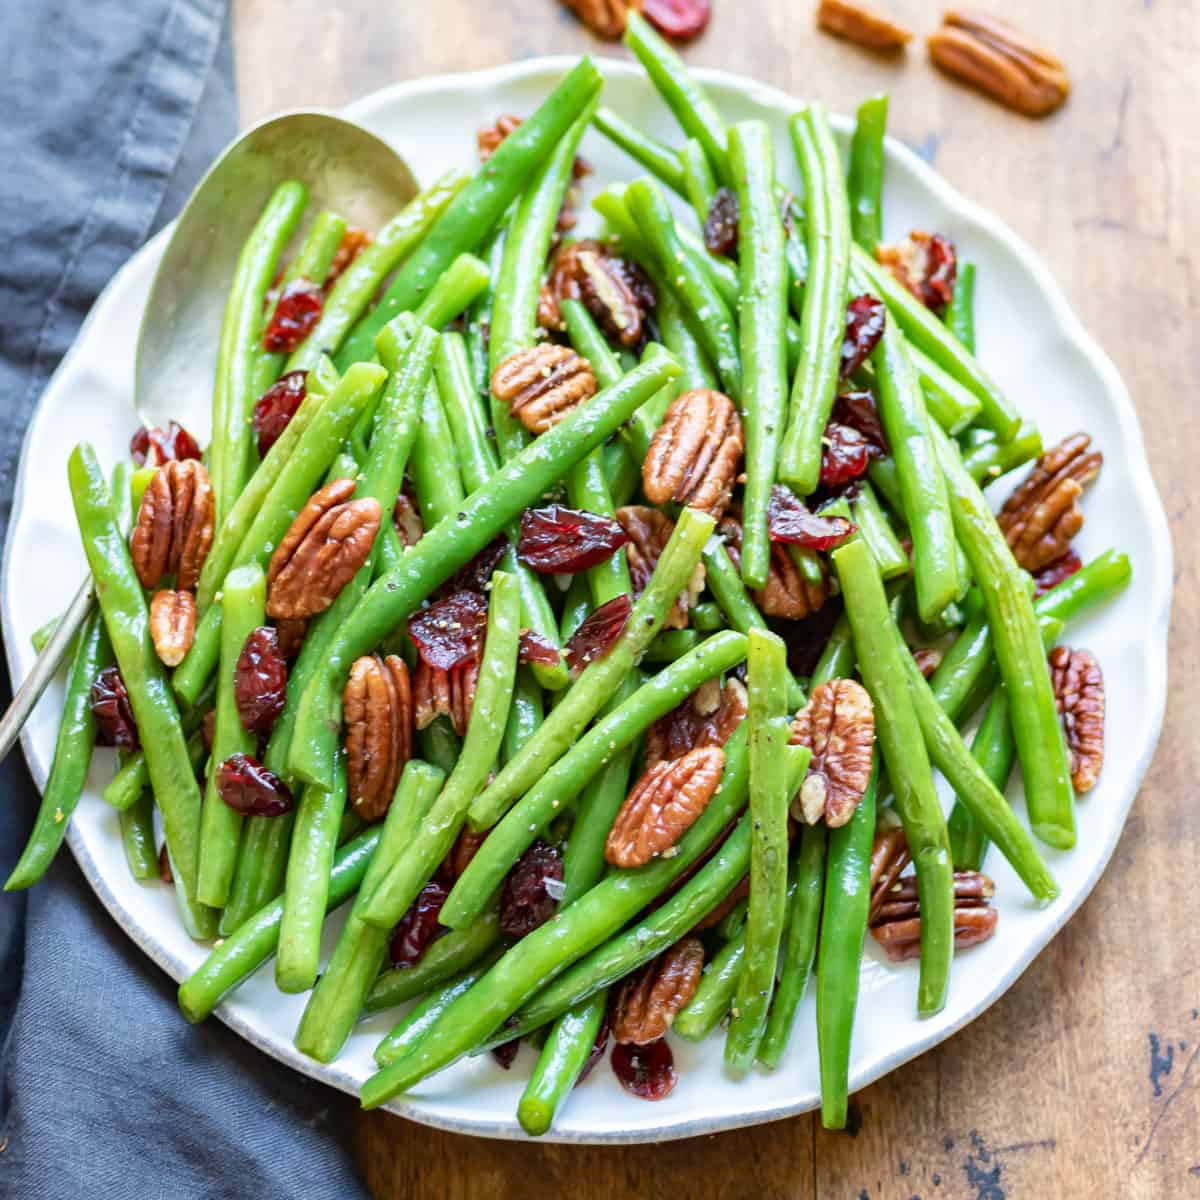 A plate of green beans.